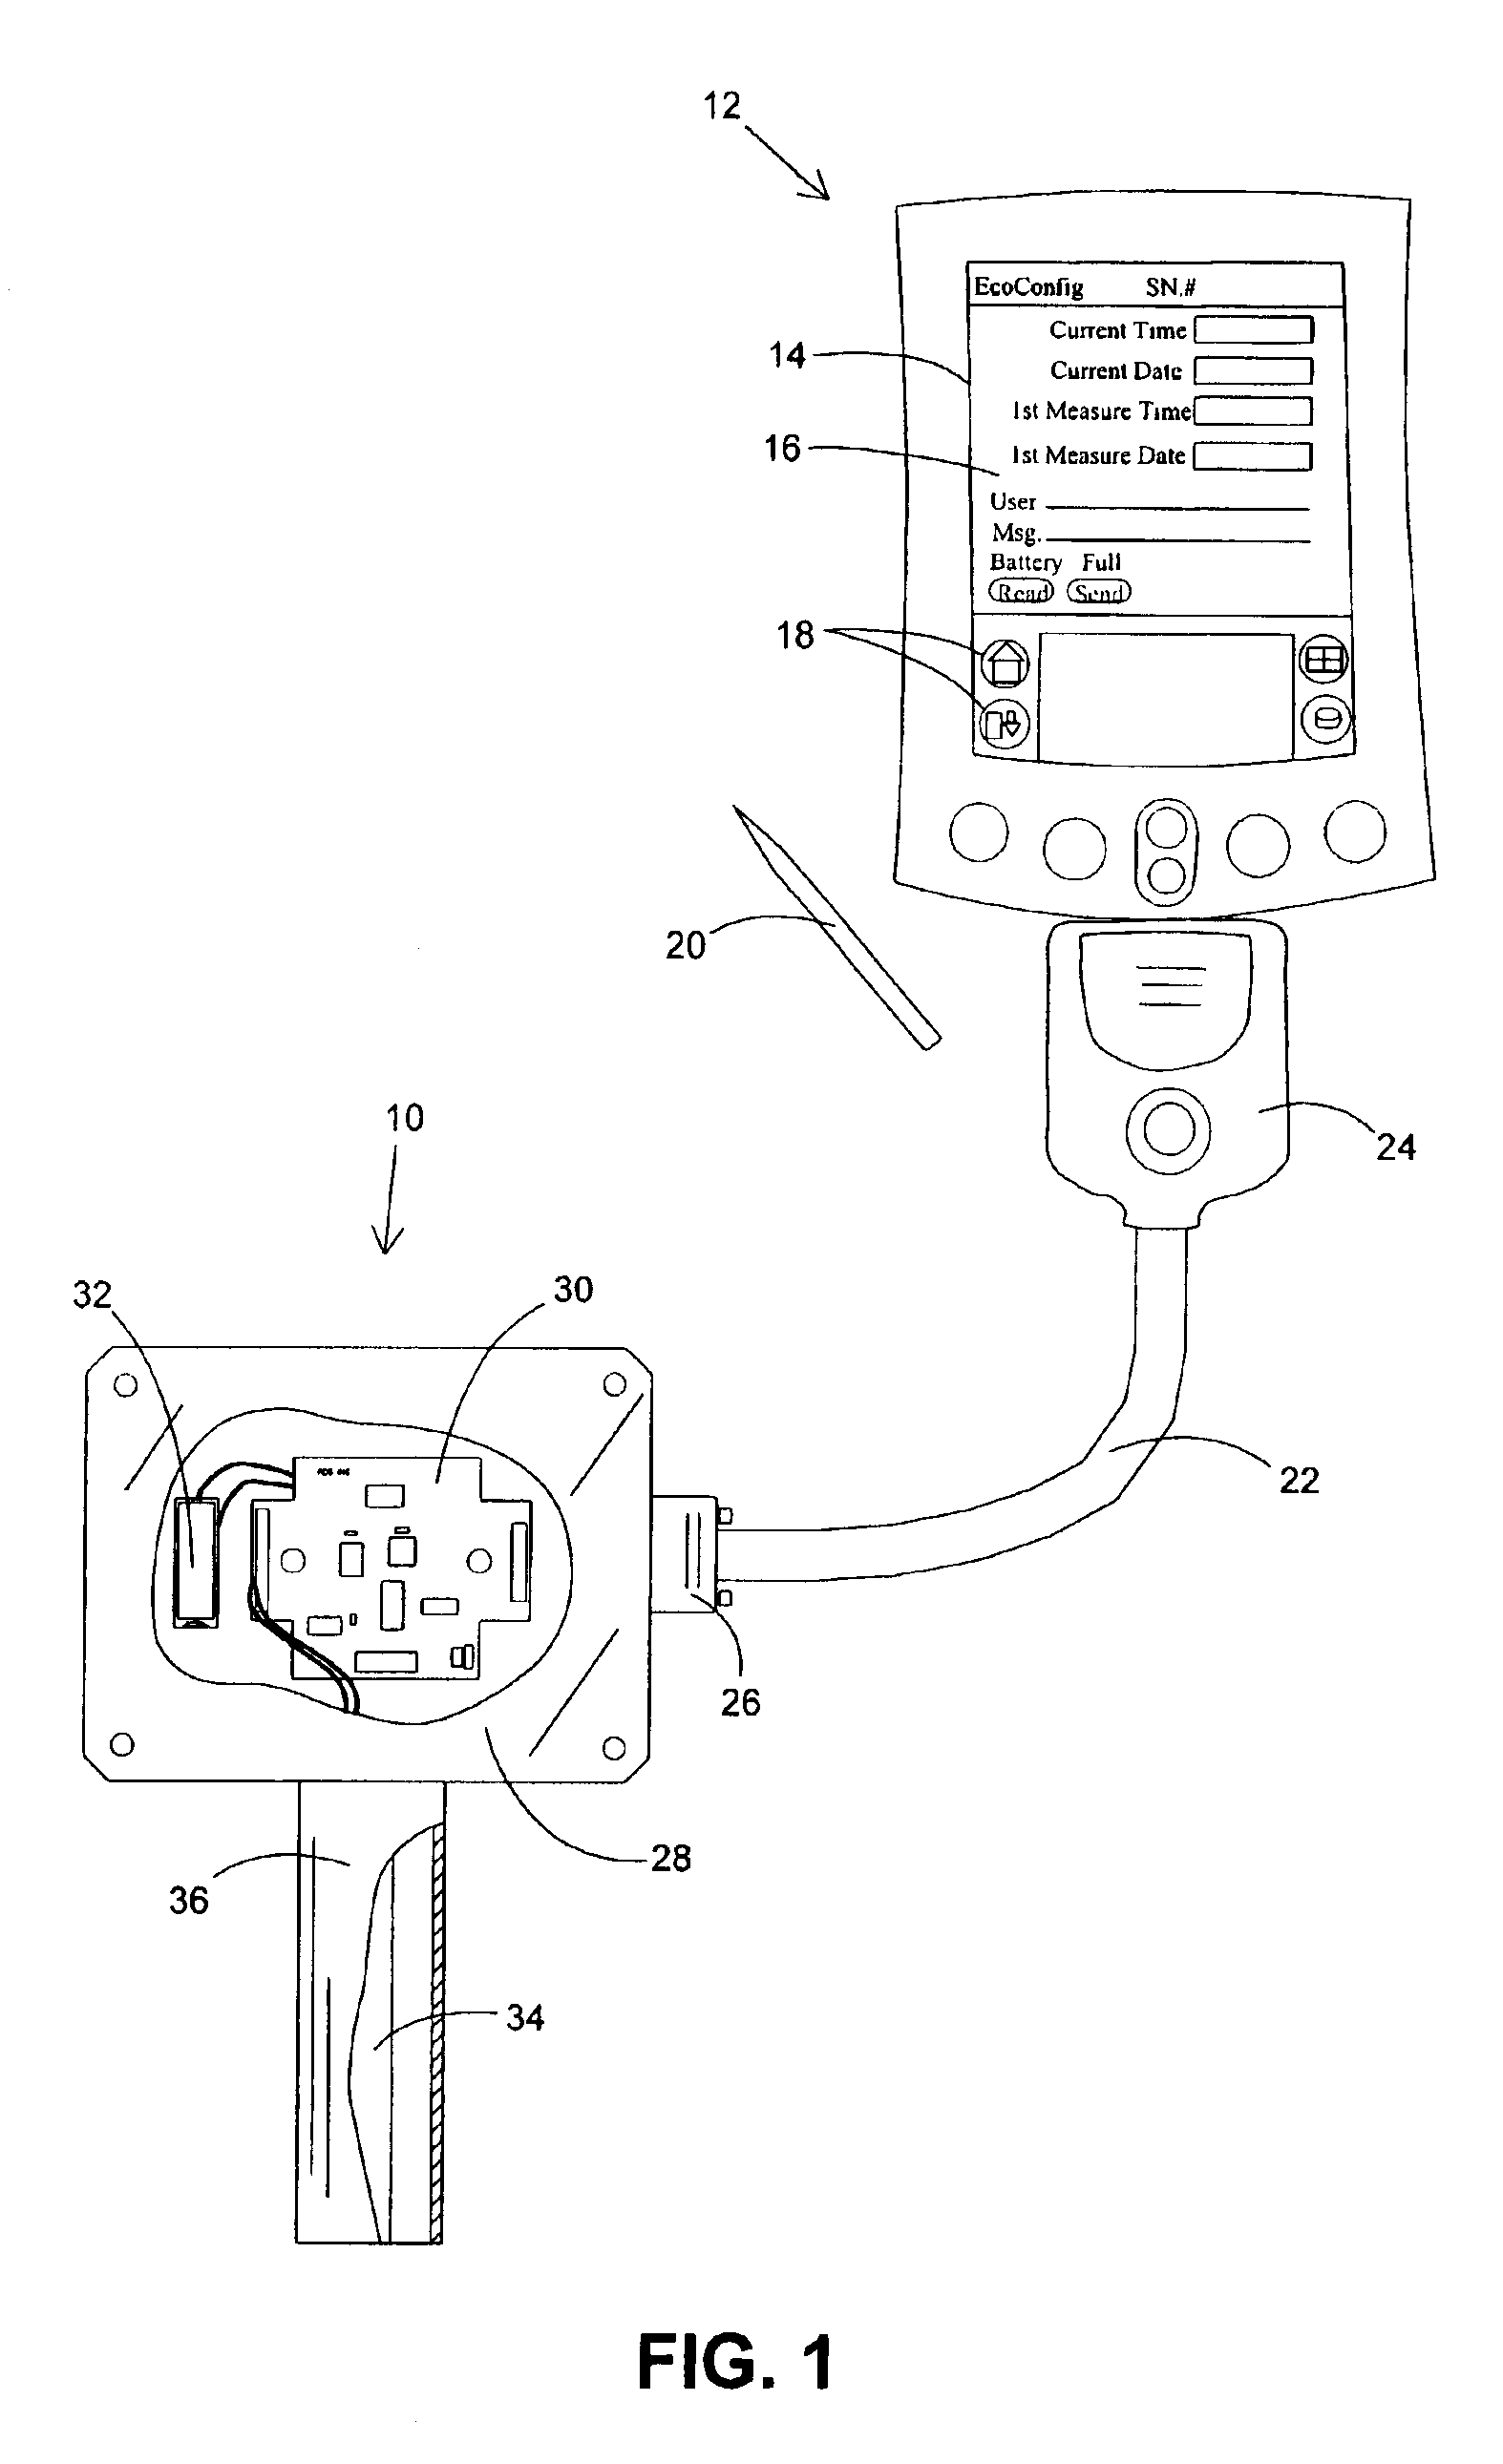 Computerized methods for data loggers